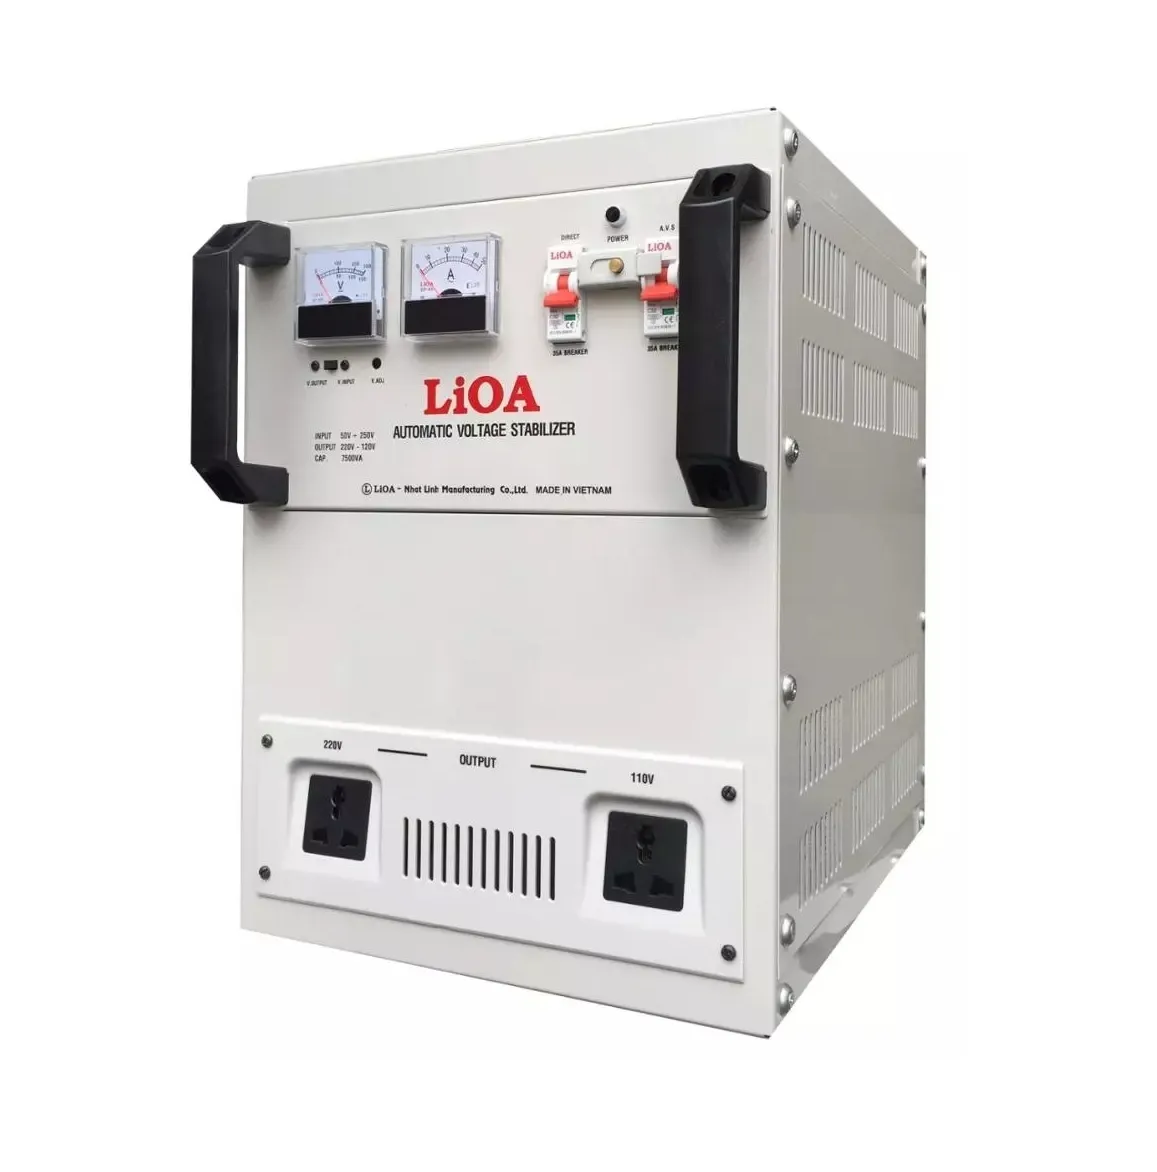 High Quality Automatic Voltage Stabilizer SH-500 II AVS made in Viet Nam Automatic Voltage stabilizer Cheap Price